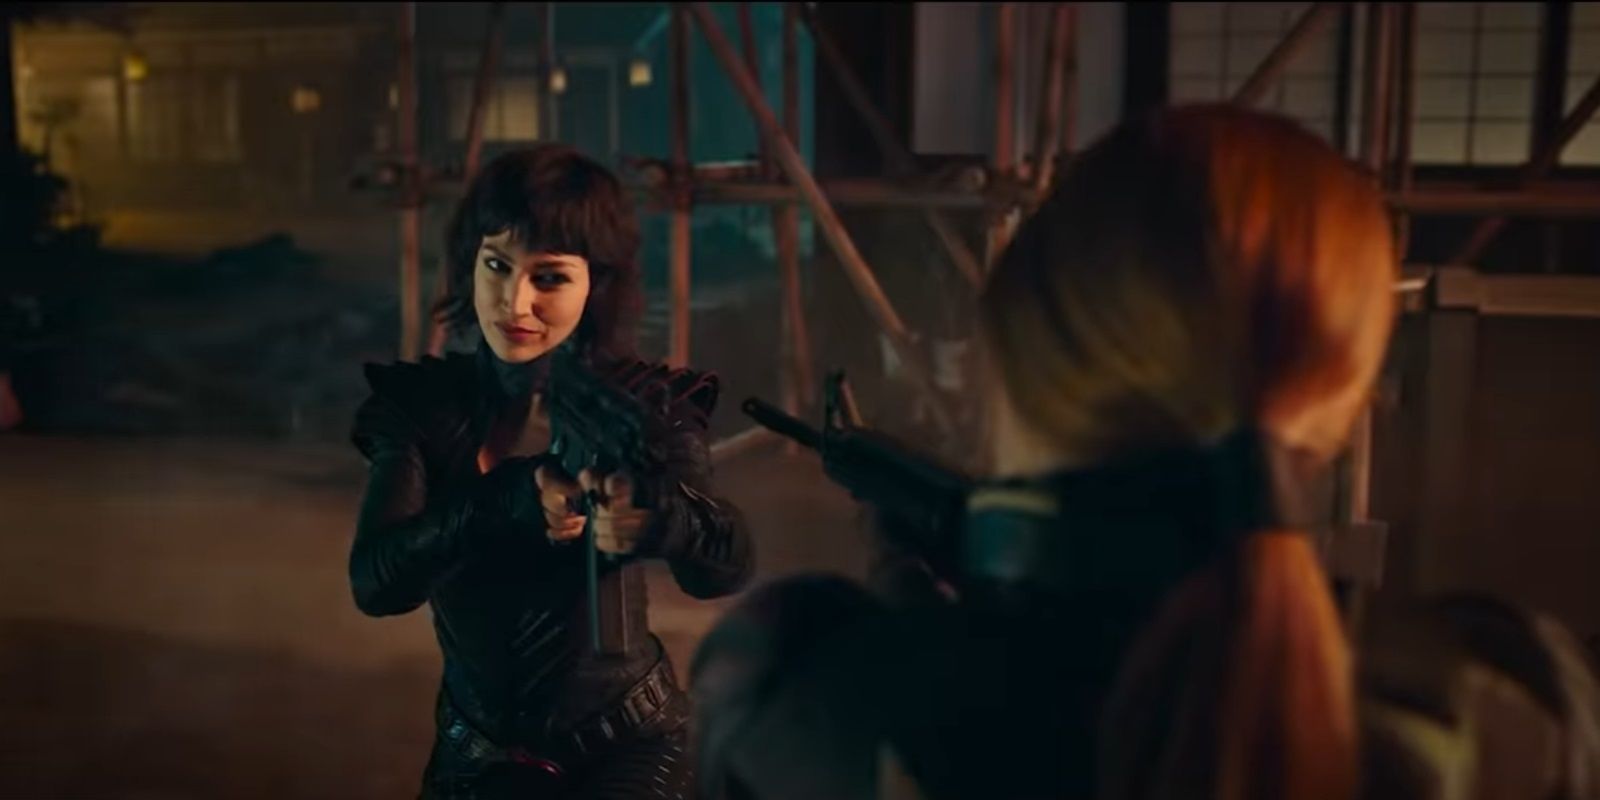 The Baroness Fights Scarlett with both aiming their guns at each other in Snake Eyes GI Joe Origins